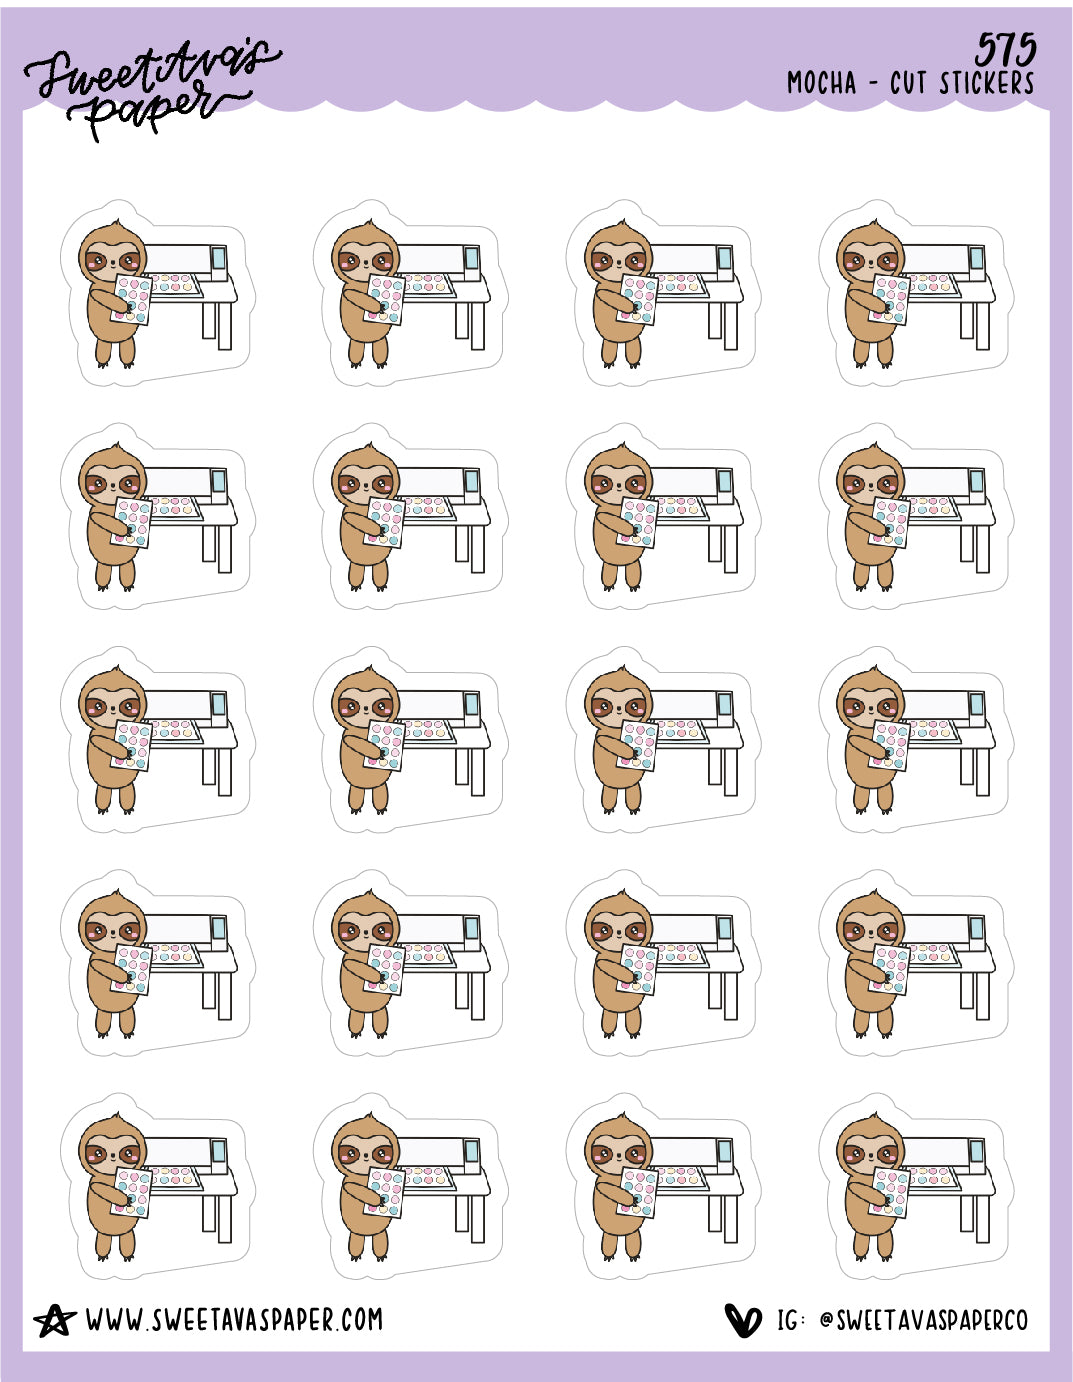 Cut Stickers Planner Stickers - Mocha The Sloth [575]